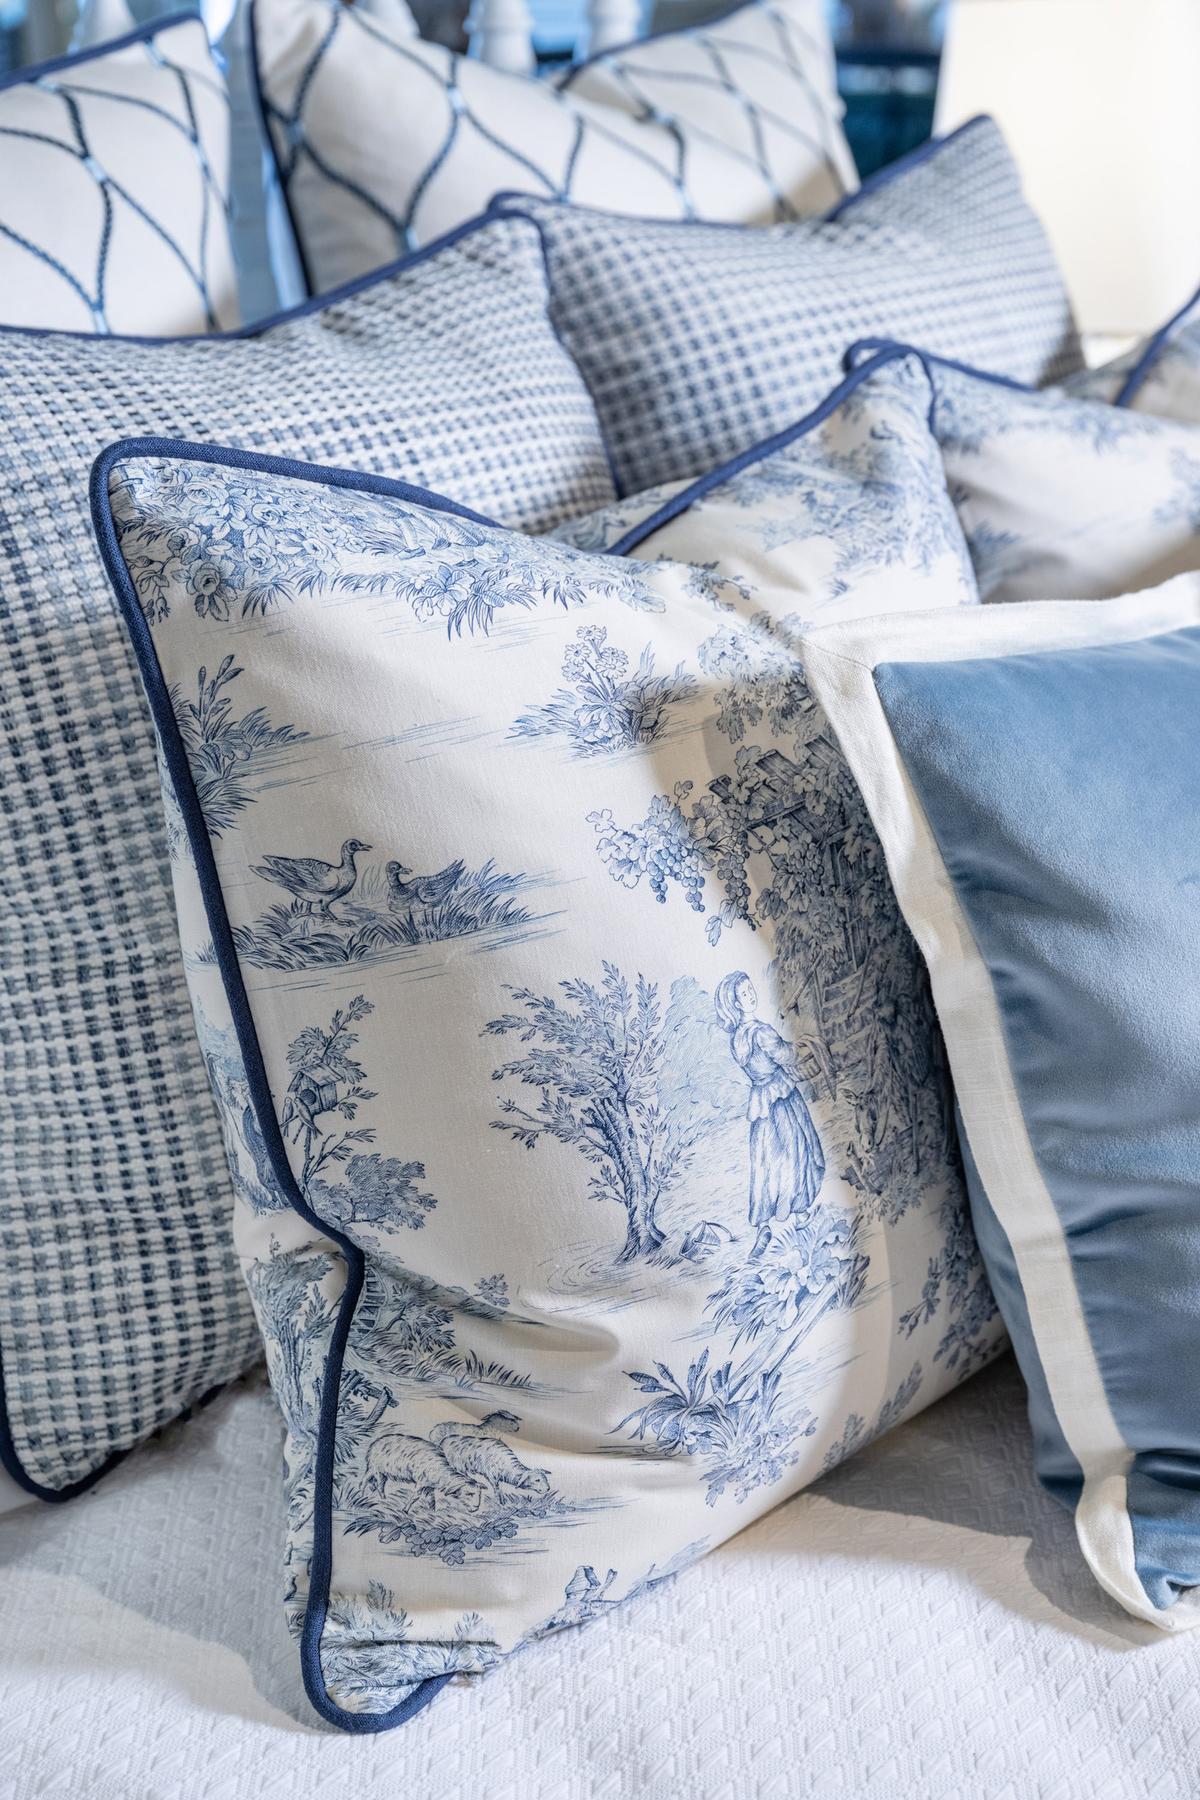 The pillows on this bedscape mix blue and white toile with similarly colored woven, embroidered, and velvet fabrics. (Handout/TNS)